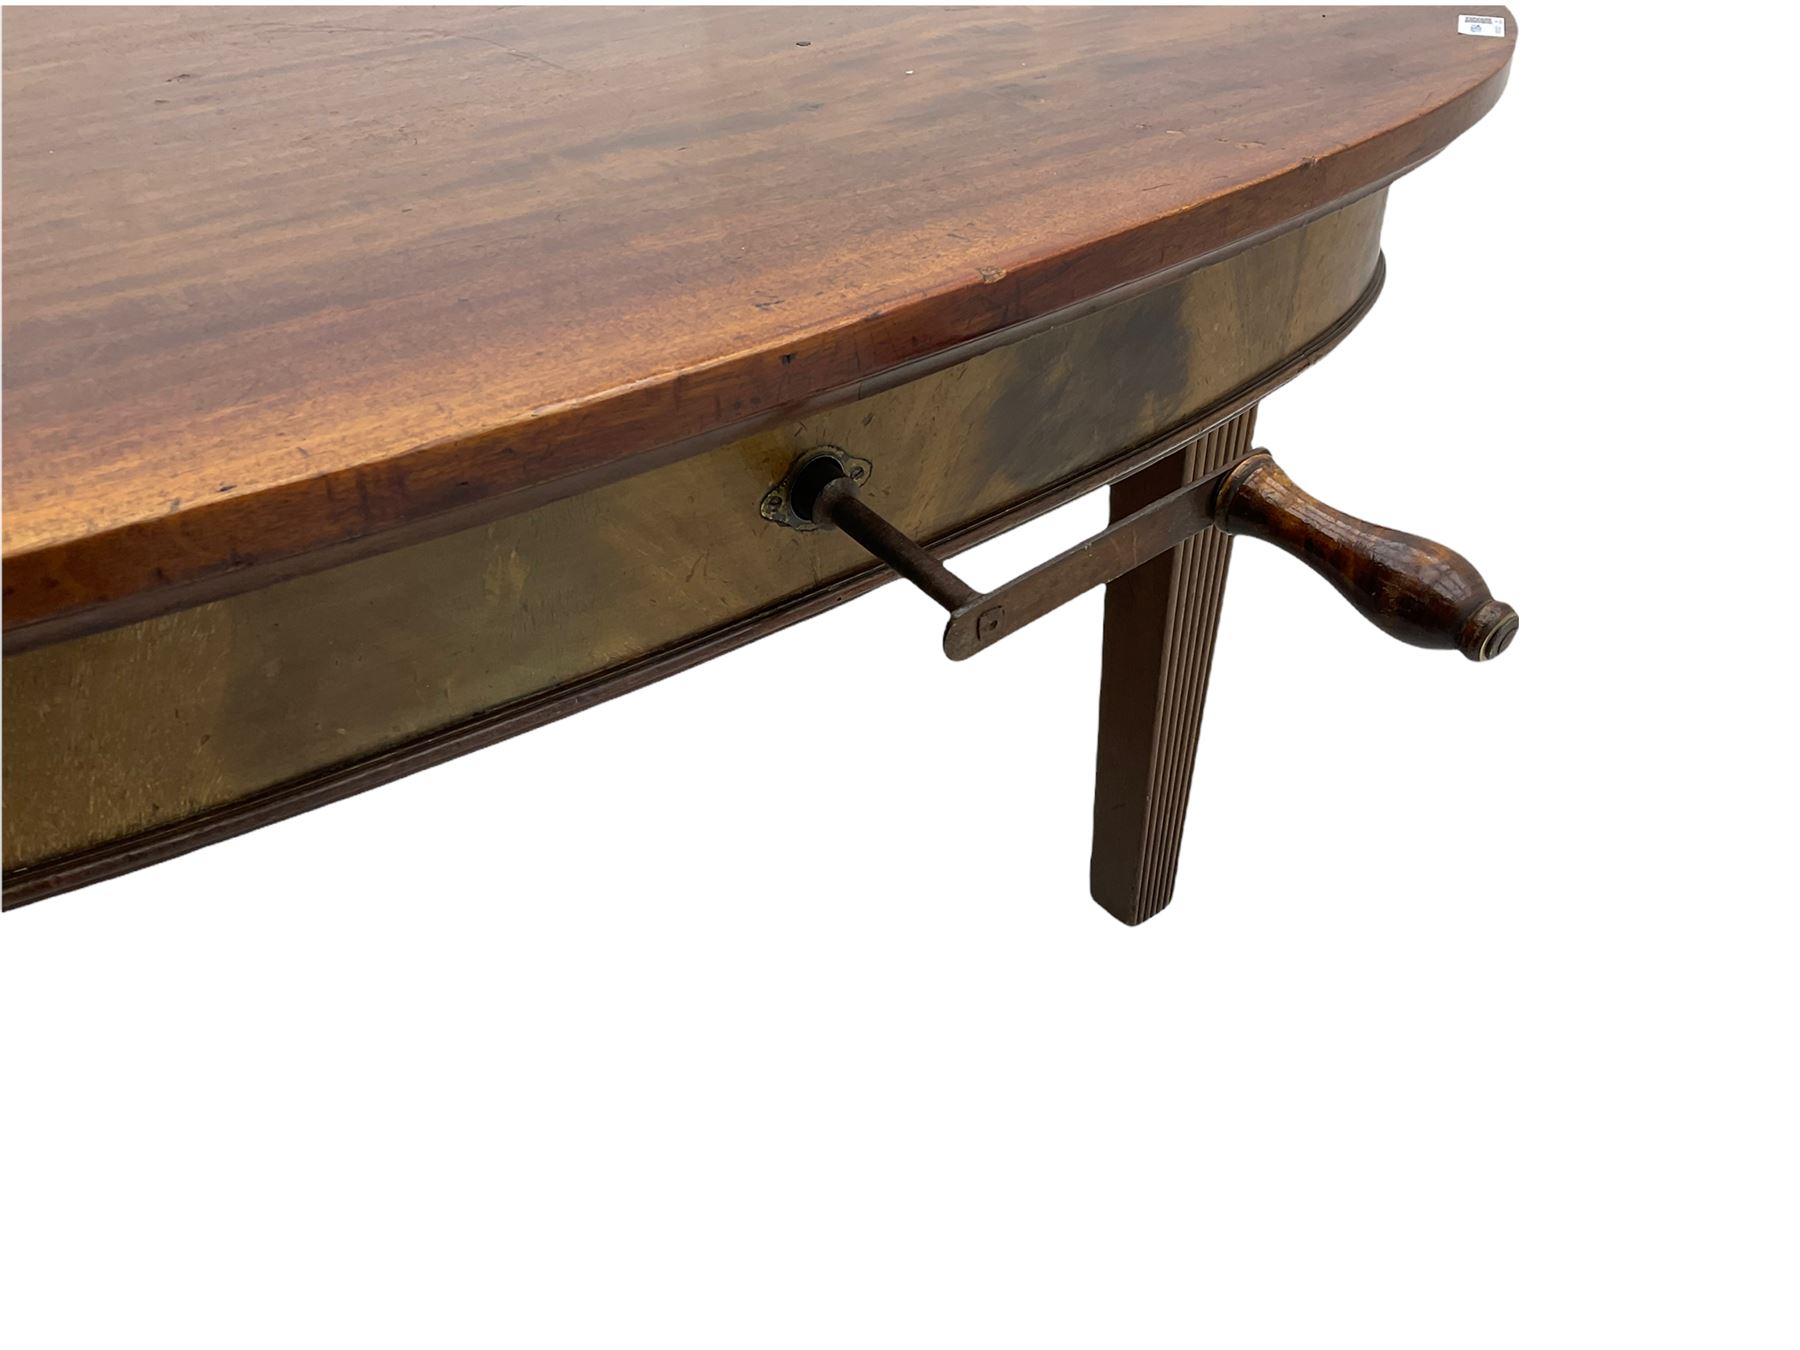 19th century mahogany extending dining table with leaf - Image 6 of 11